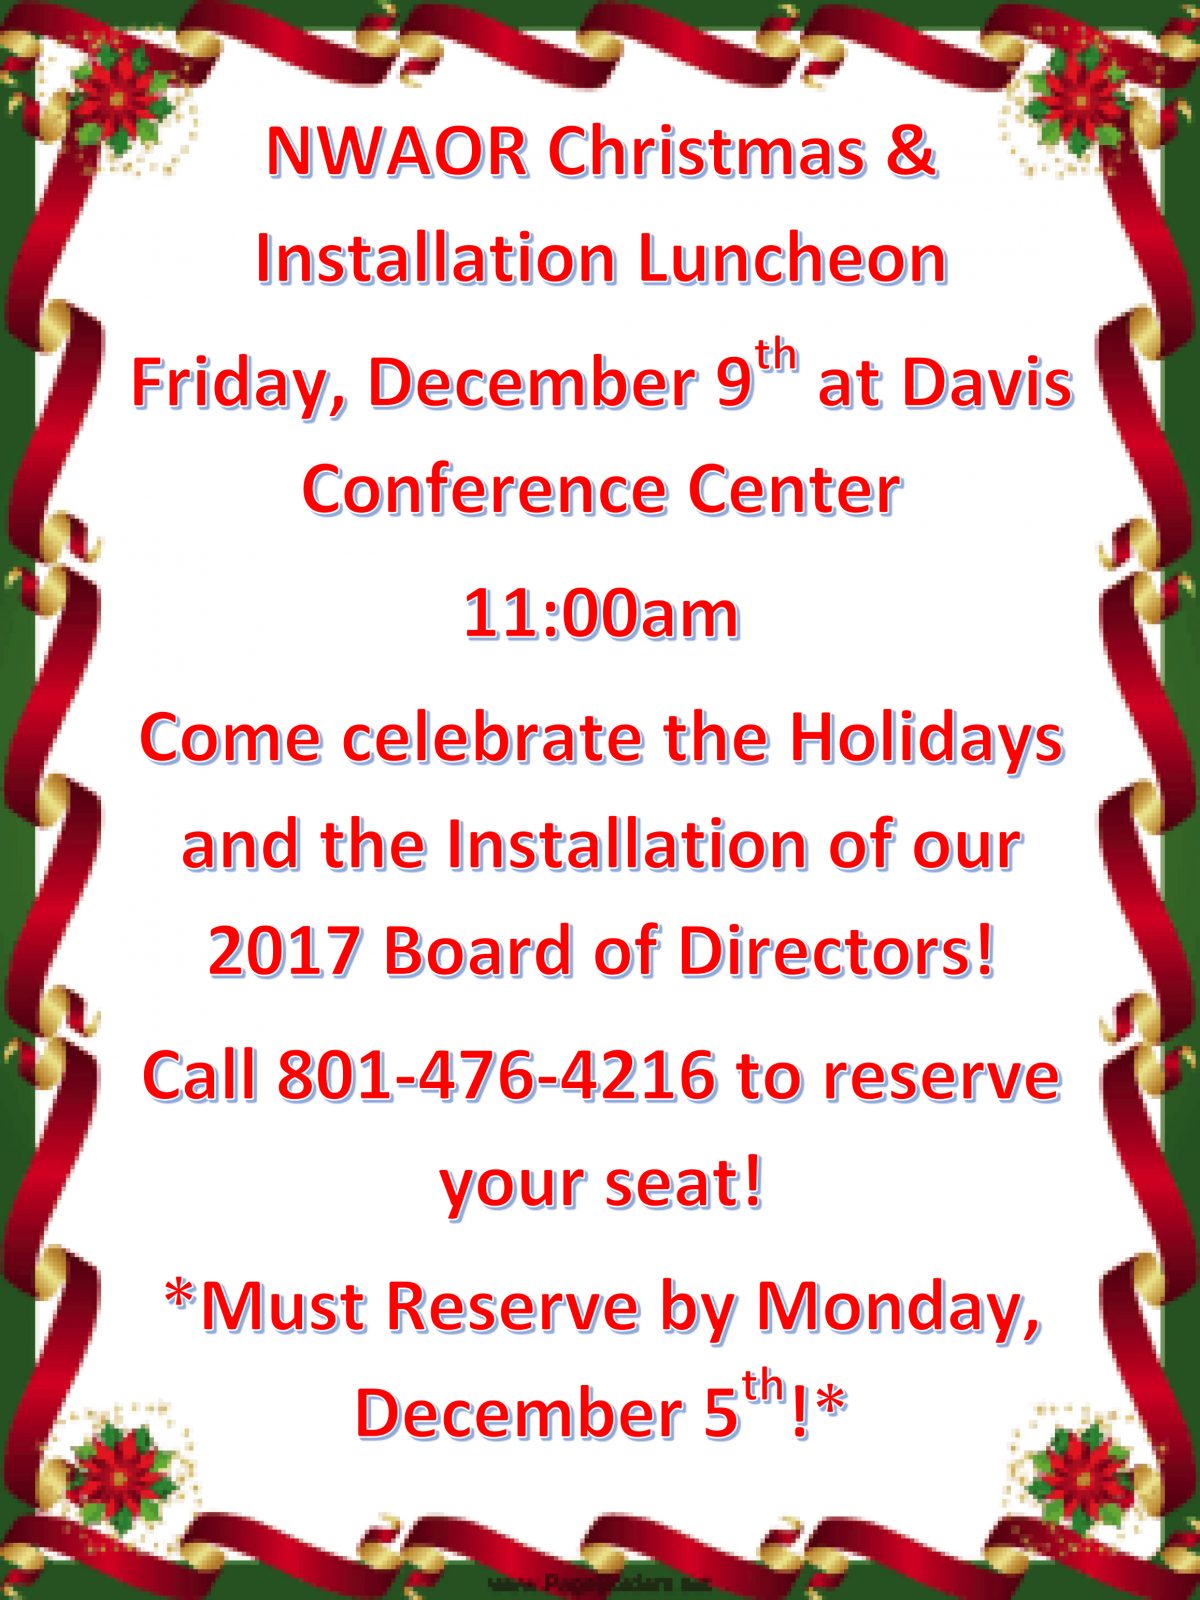 Holiday Lunch Flyer Template from www.nwaor.com